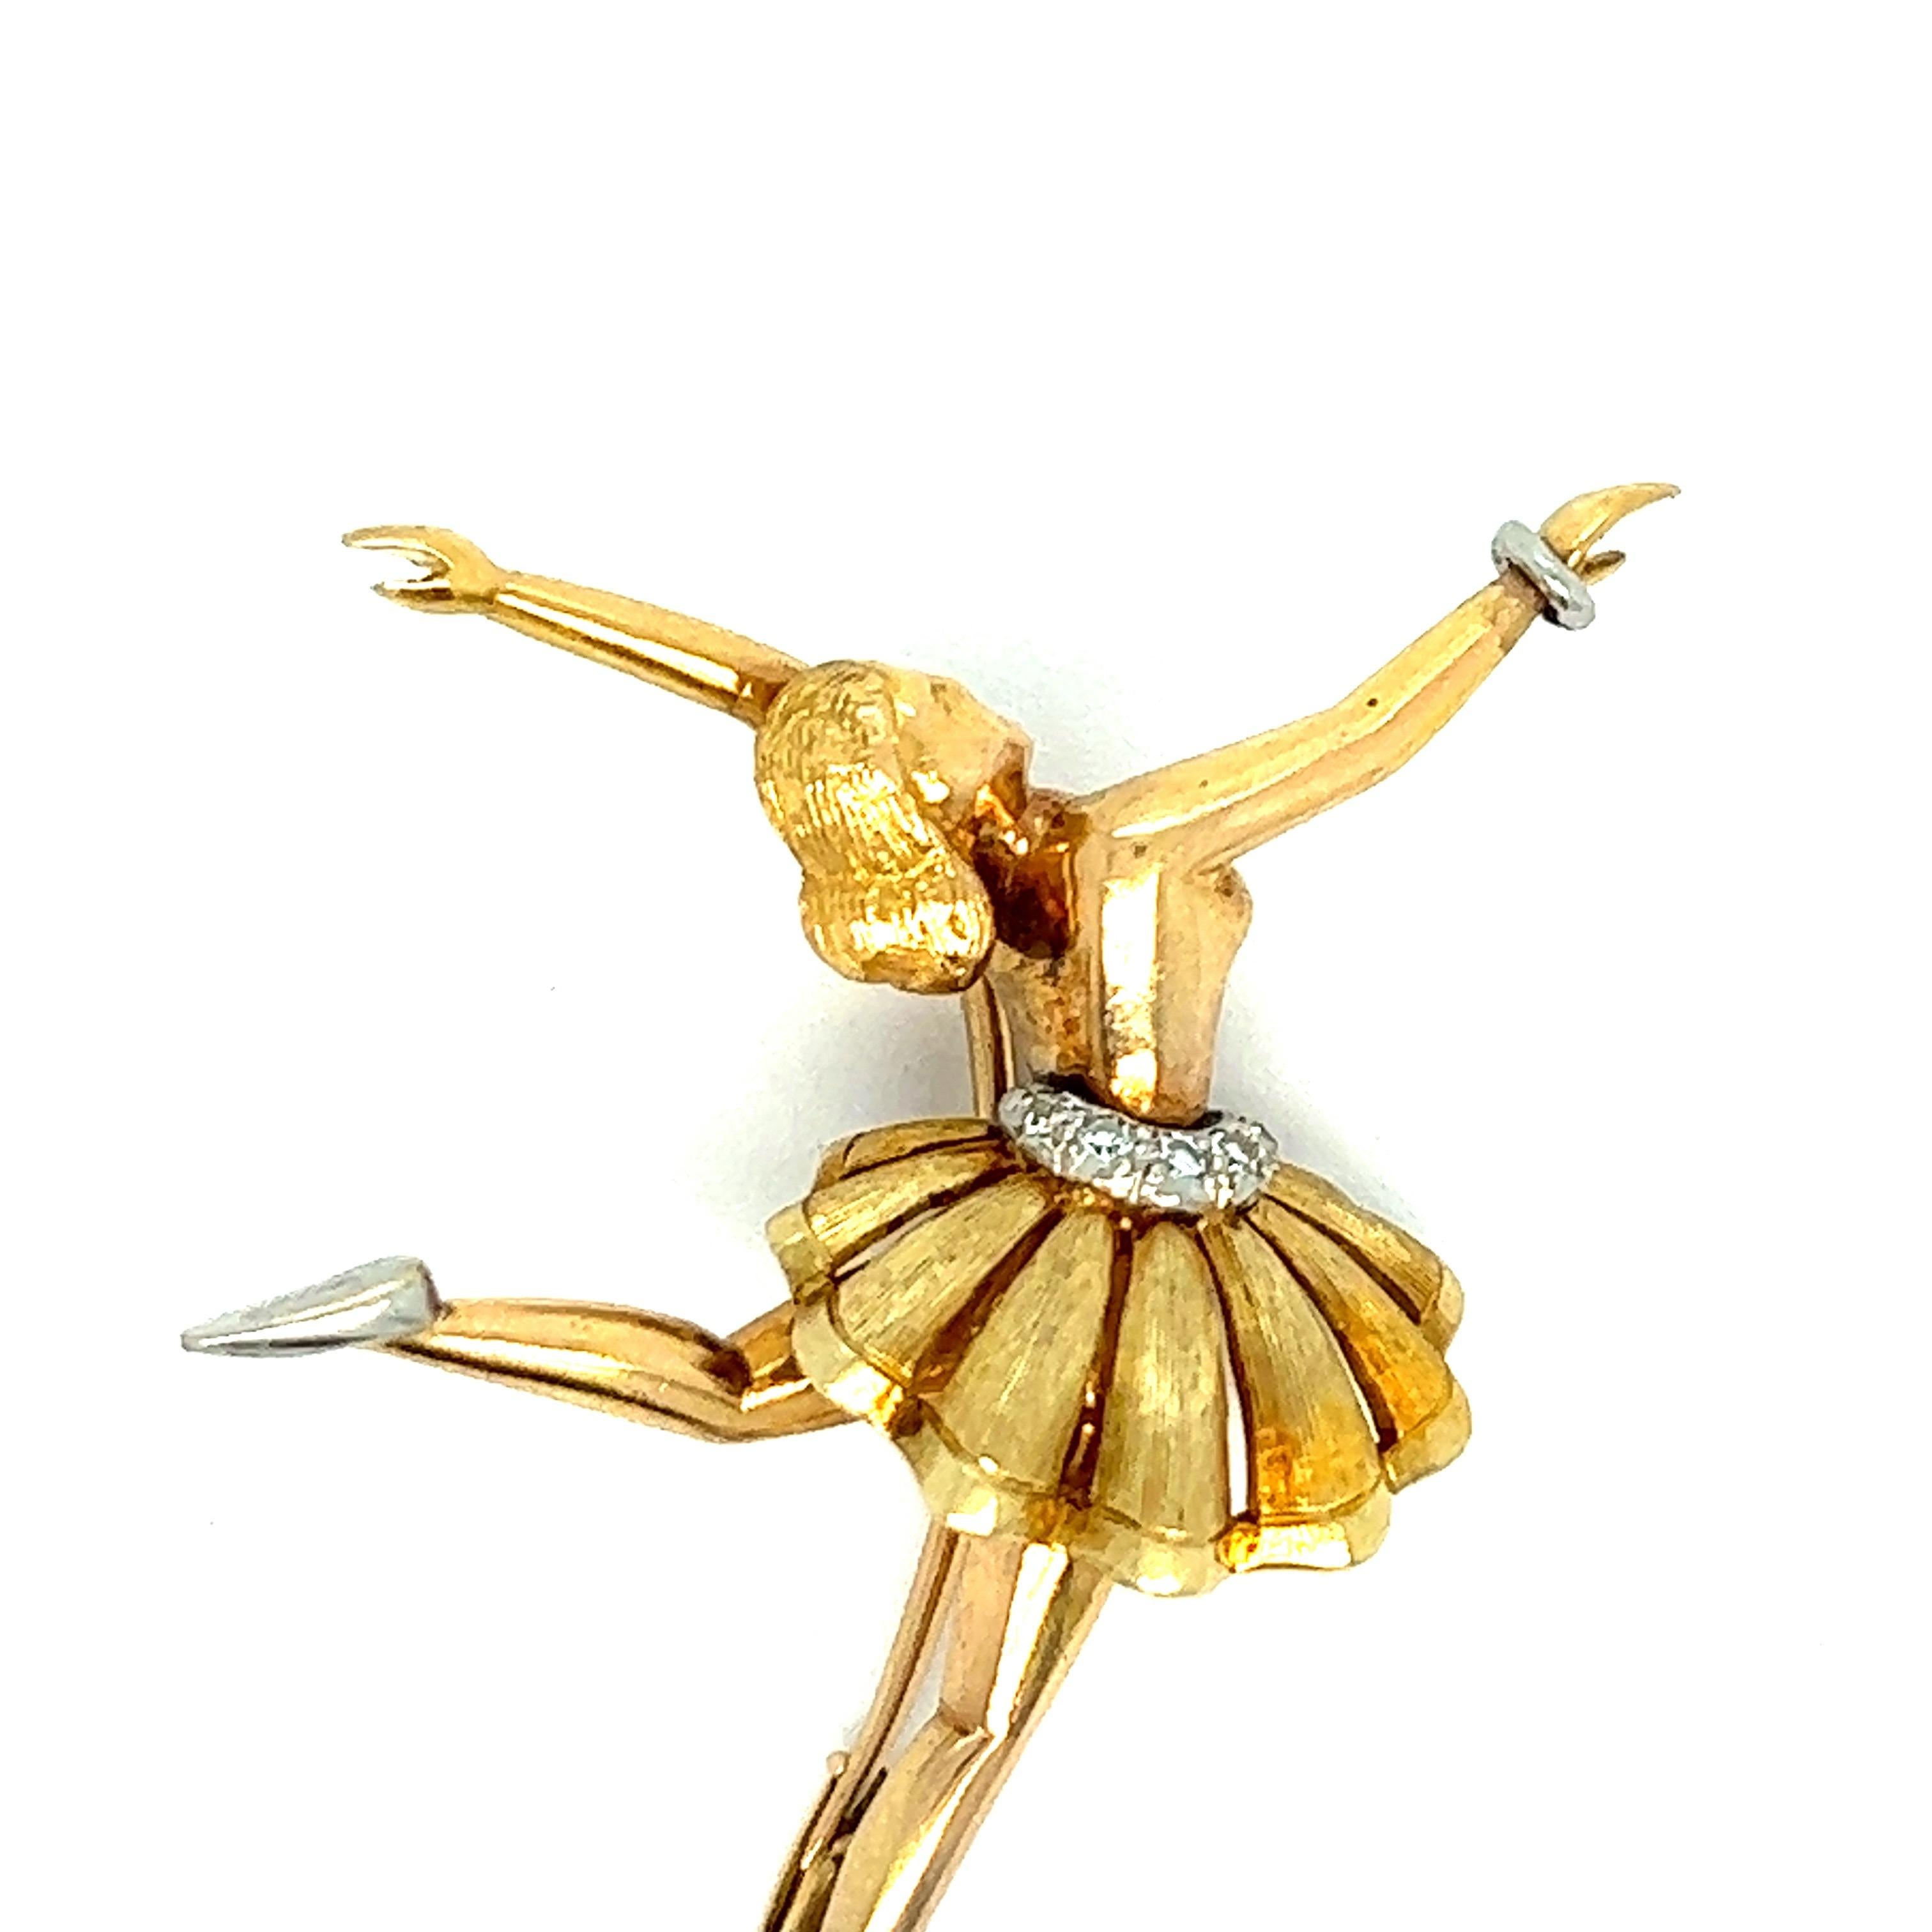 Vintage ballerina gold brooch

Round-cut diamonds, dancing ballerina motif, 18 karat yellow gold; marked 18k

Size: width 1.25 inches, length 1.75 inches
Total weight: 15.5 grams